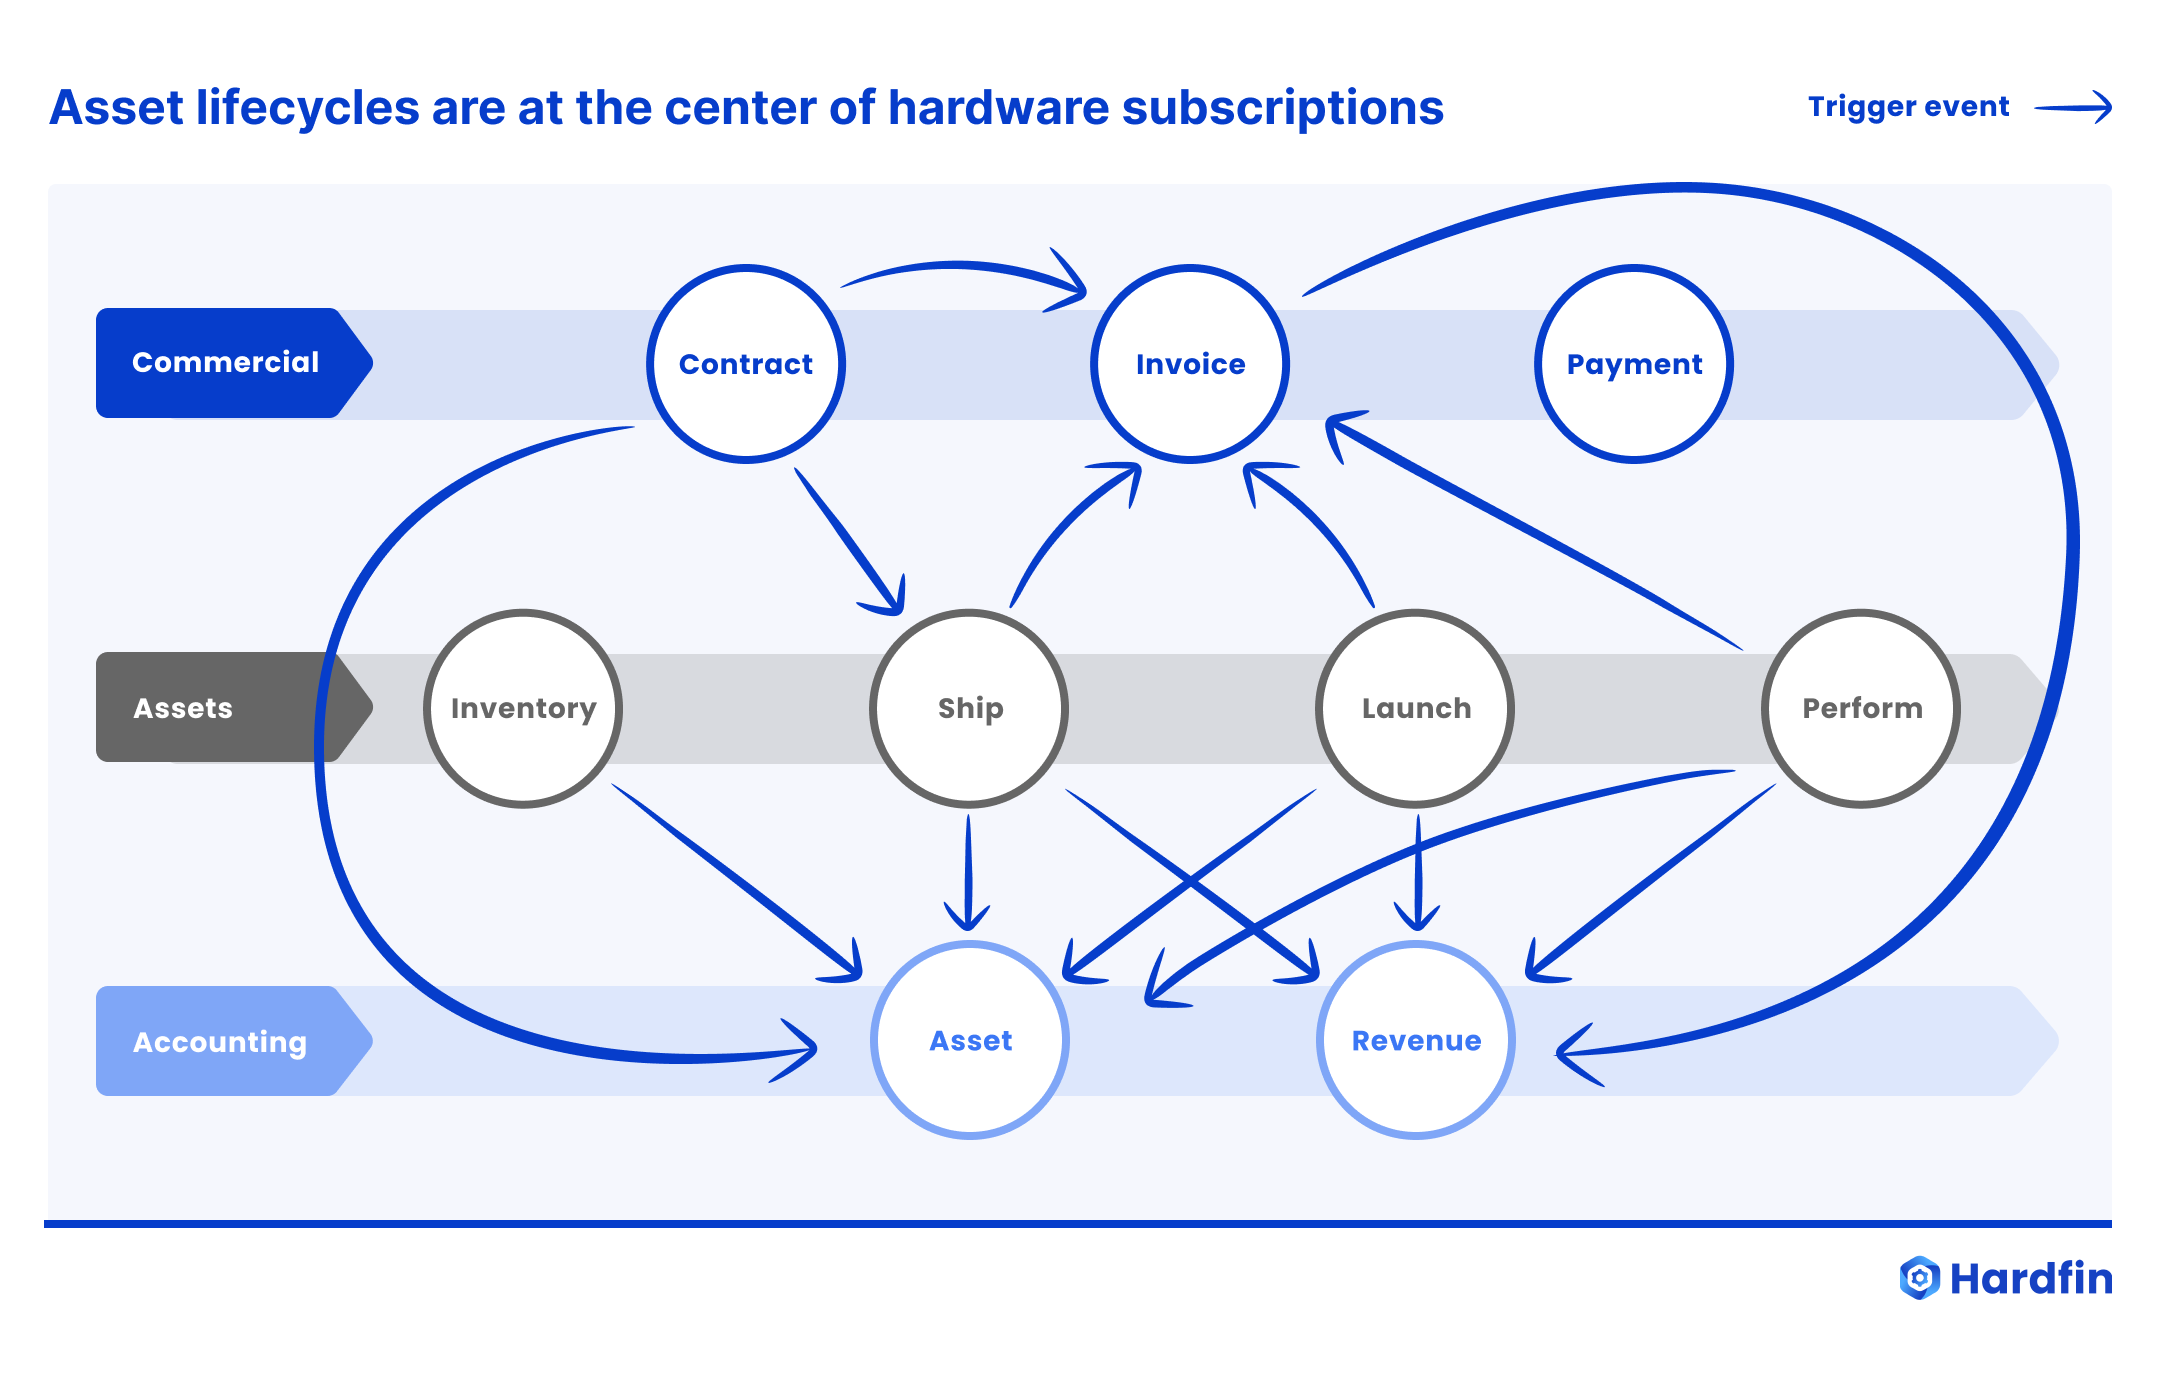 Hardfin fundamentals of hardware as a service (HaaS) asset lifecycles asset lifecycles at the center